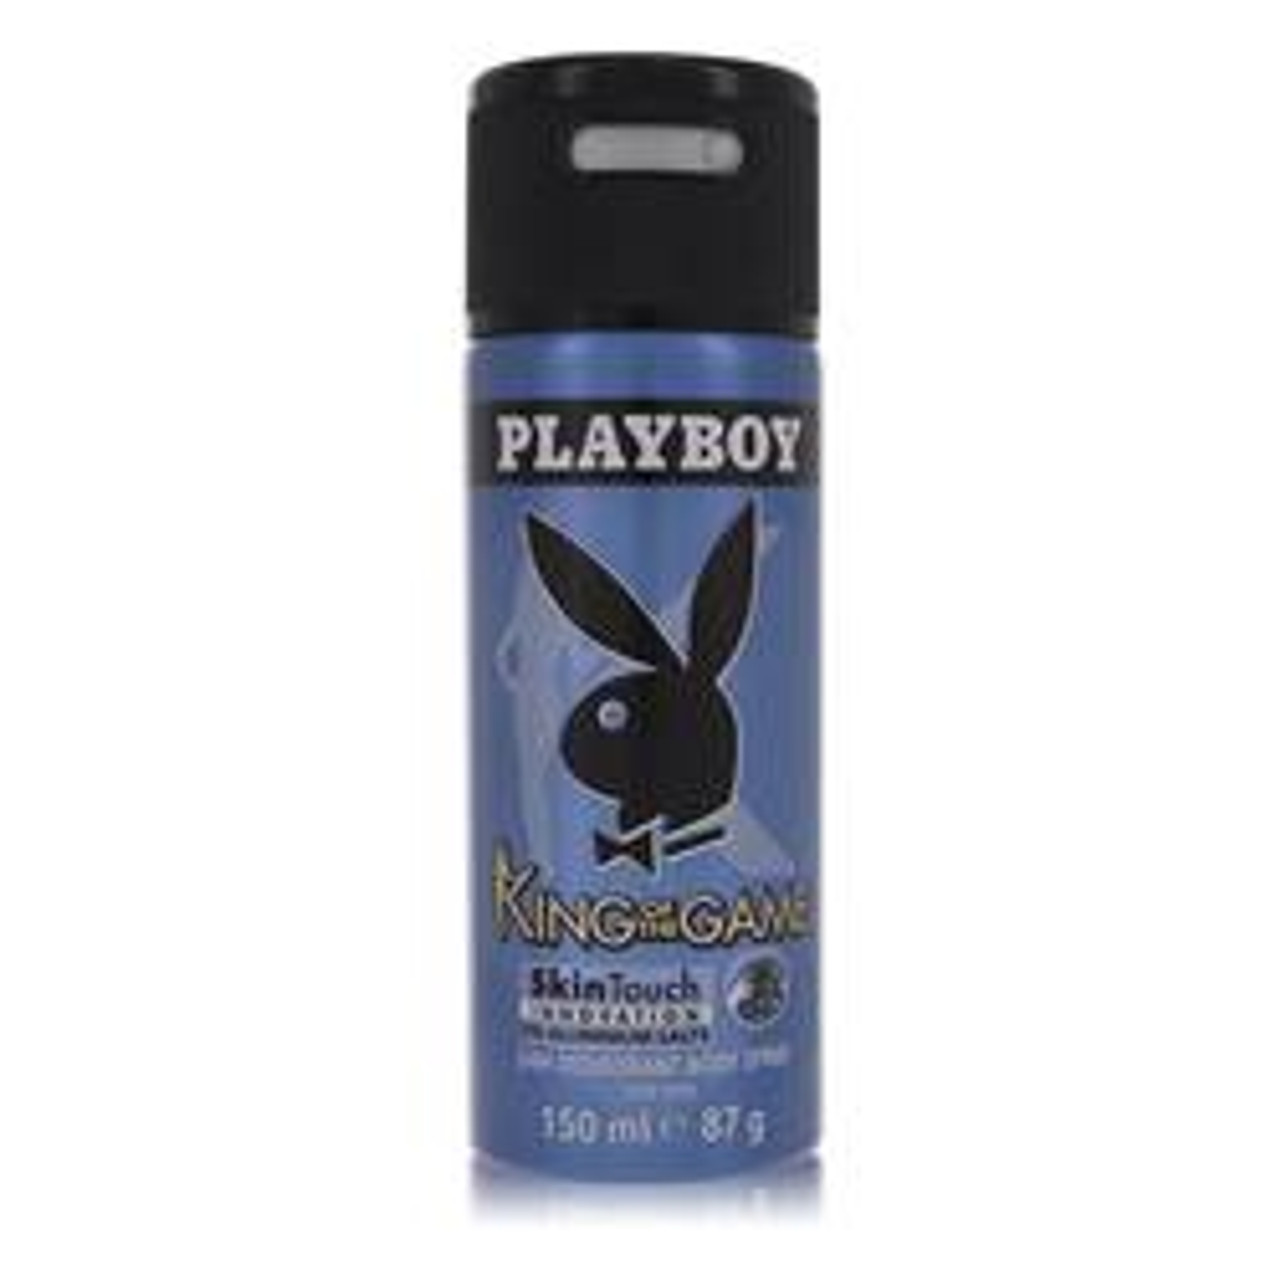 Playboy King Of The Game Cologne By Playboy Deodorant Spray 5 oz for Men - [From 23.00 - Choose pk Qty ] - *Ships from Miami